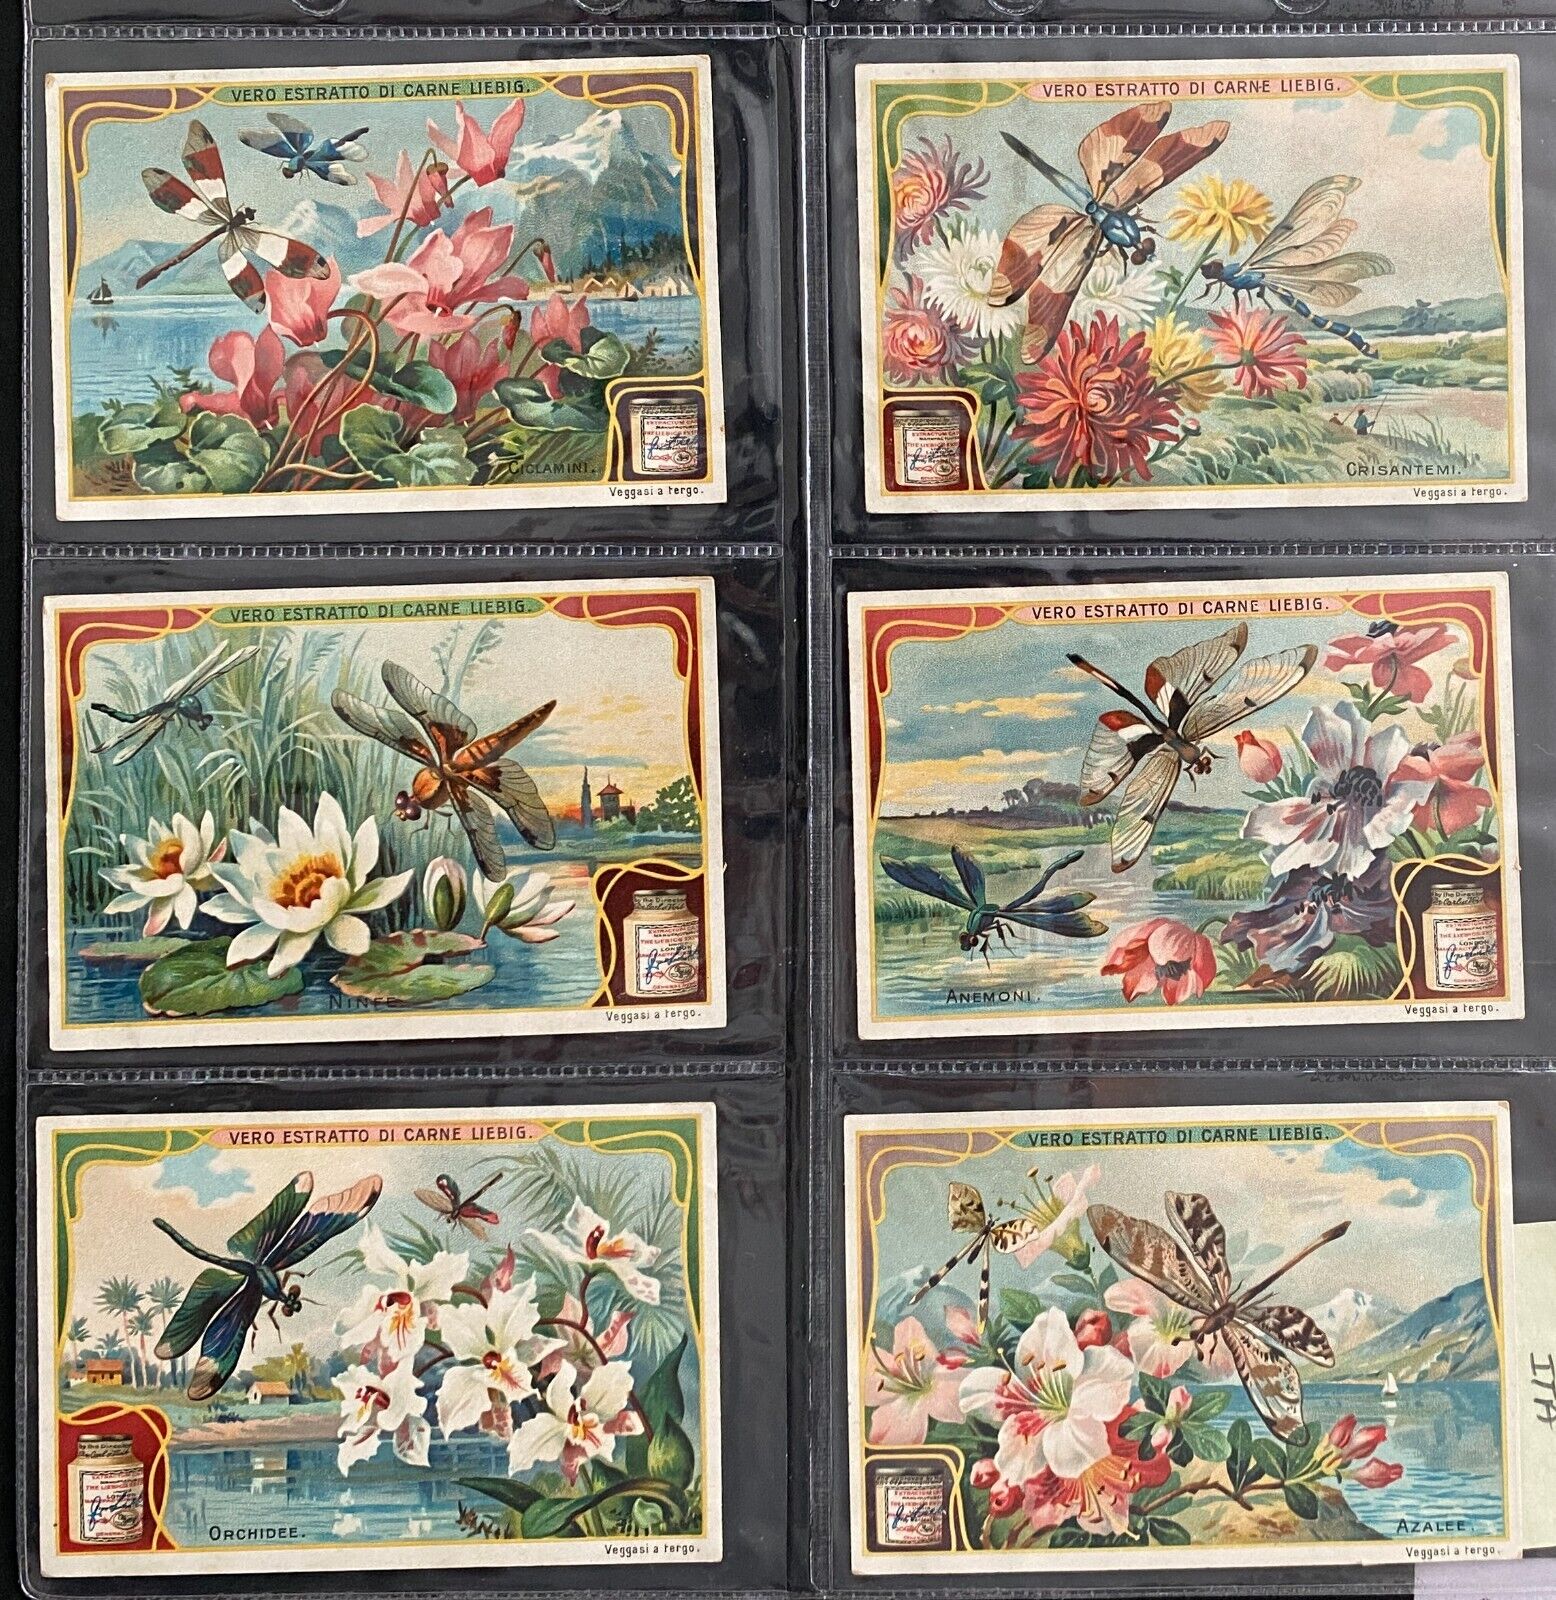 6 LIEBIG ITALY CHROMOS NUMBER S896 FLOWERS AND DRAGONFLY 1907